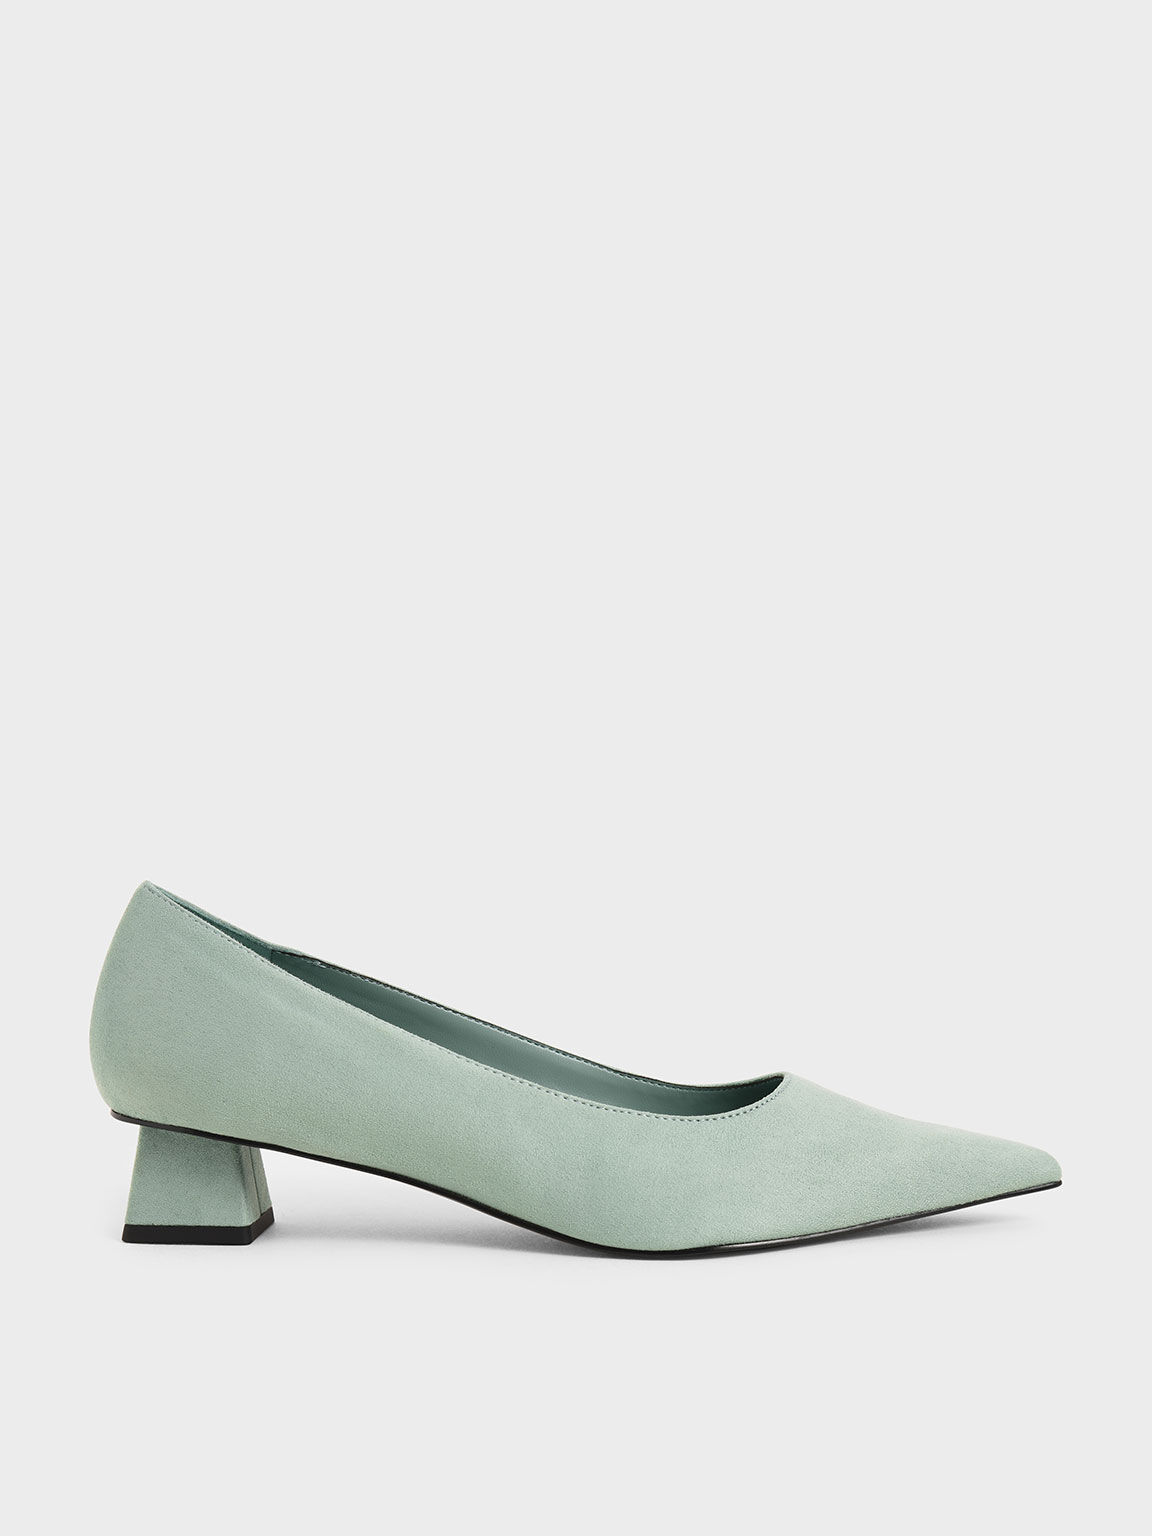 Mint Green Trapeze Heel Pumps - CHARLES & KEITH KR